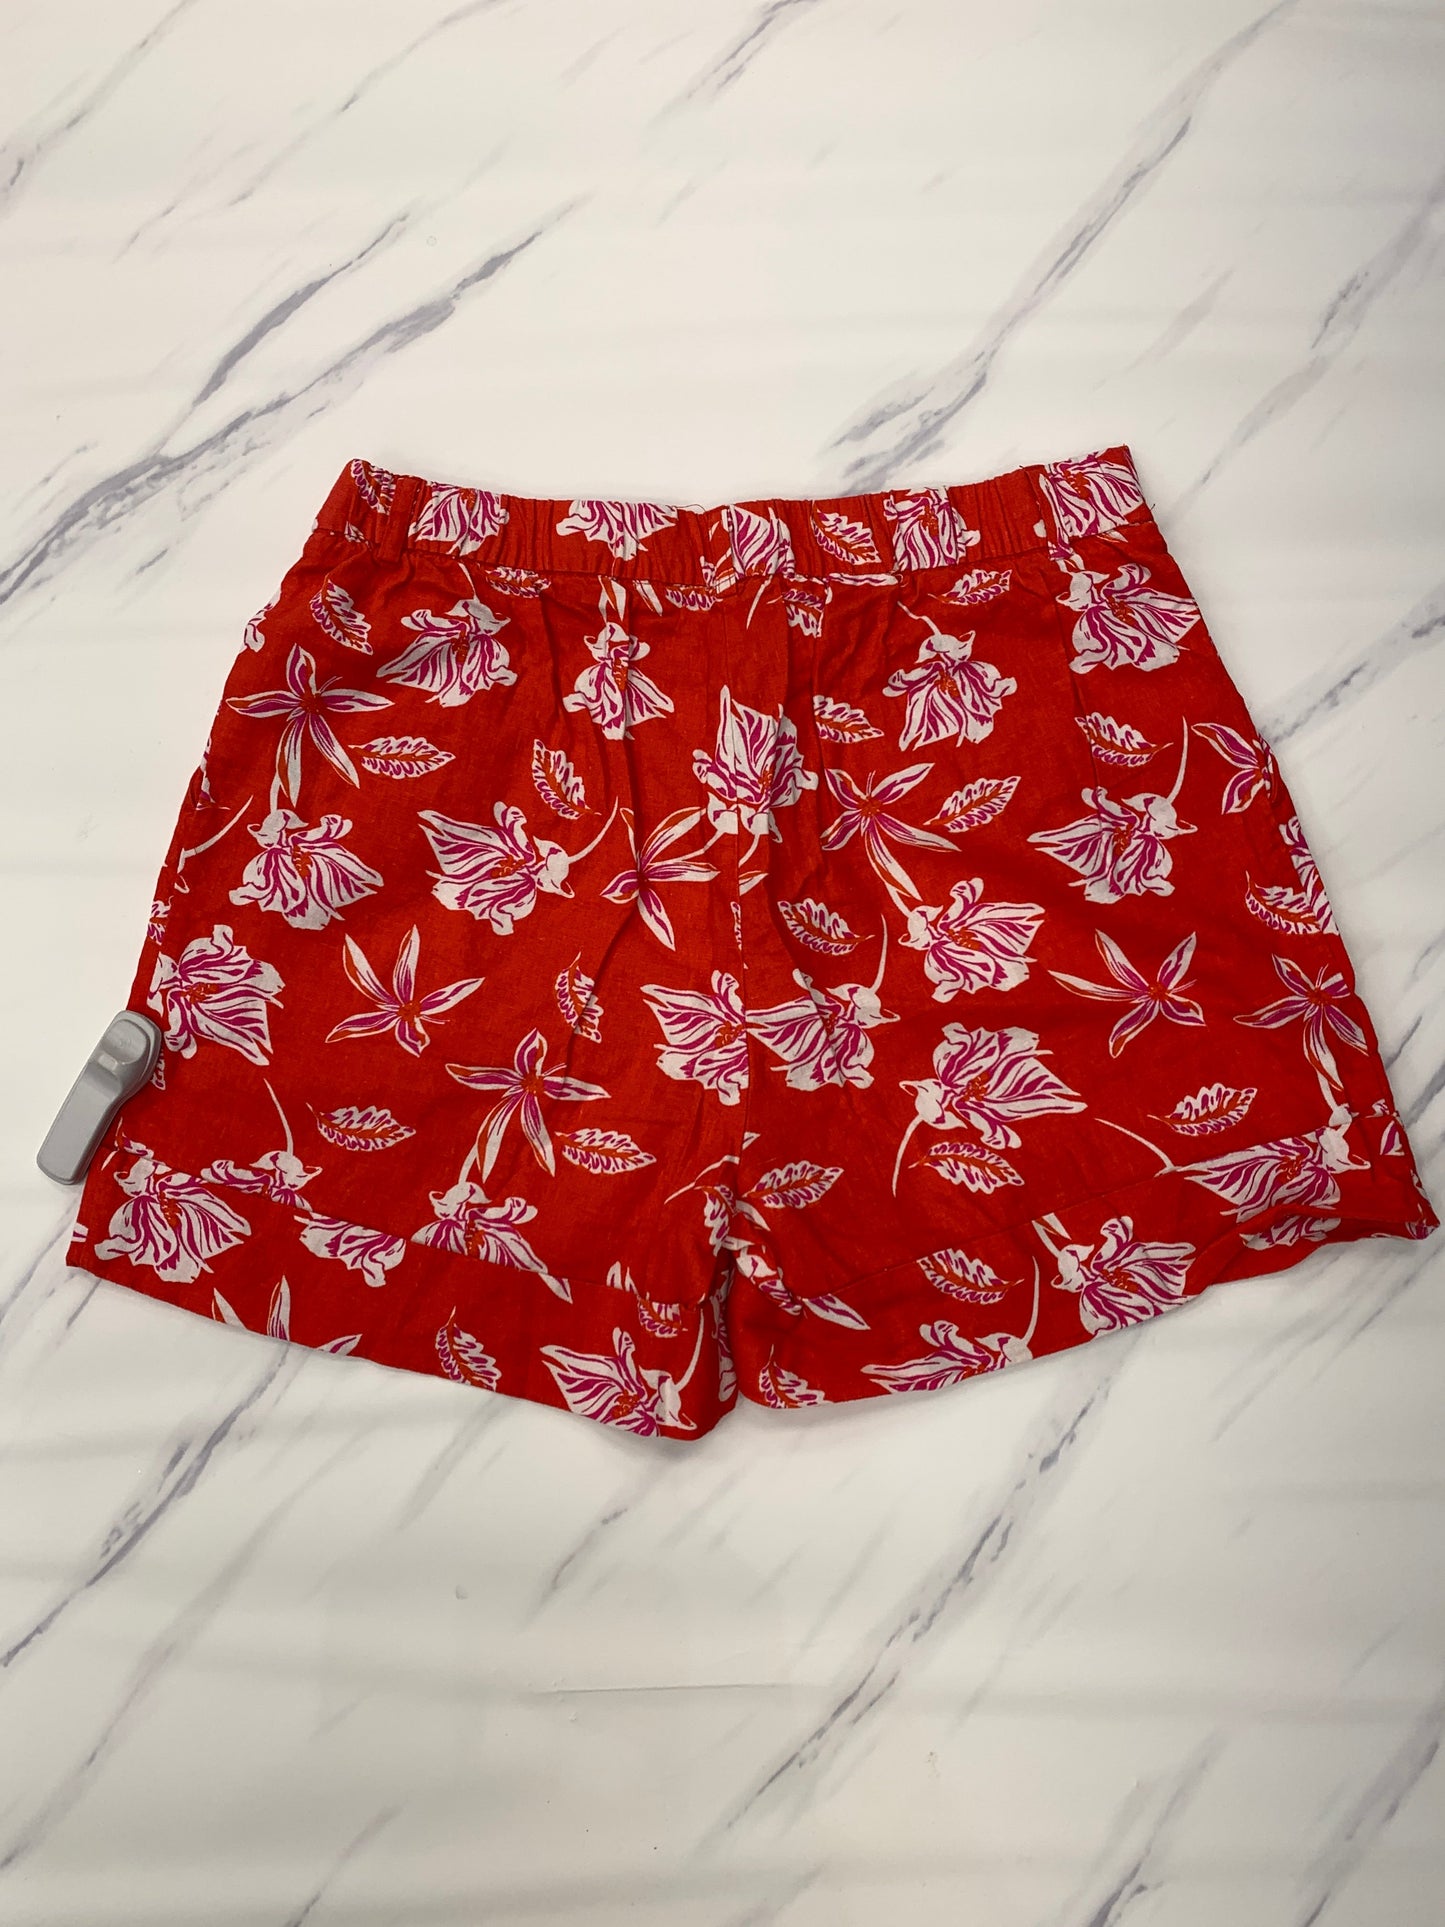 Red Shorts Joie, Size 12